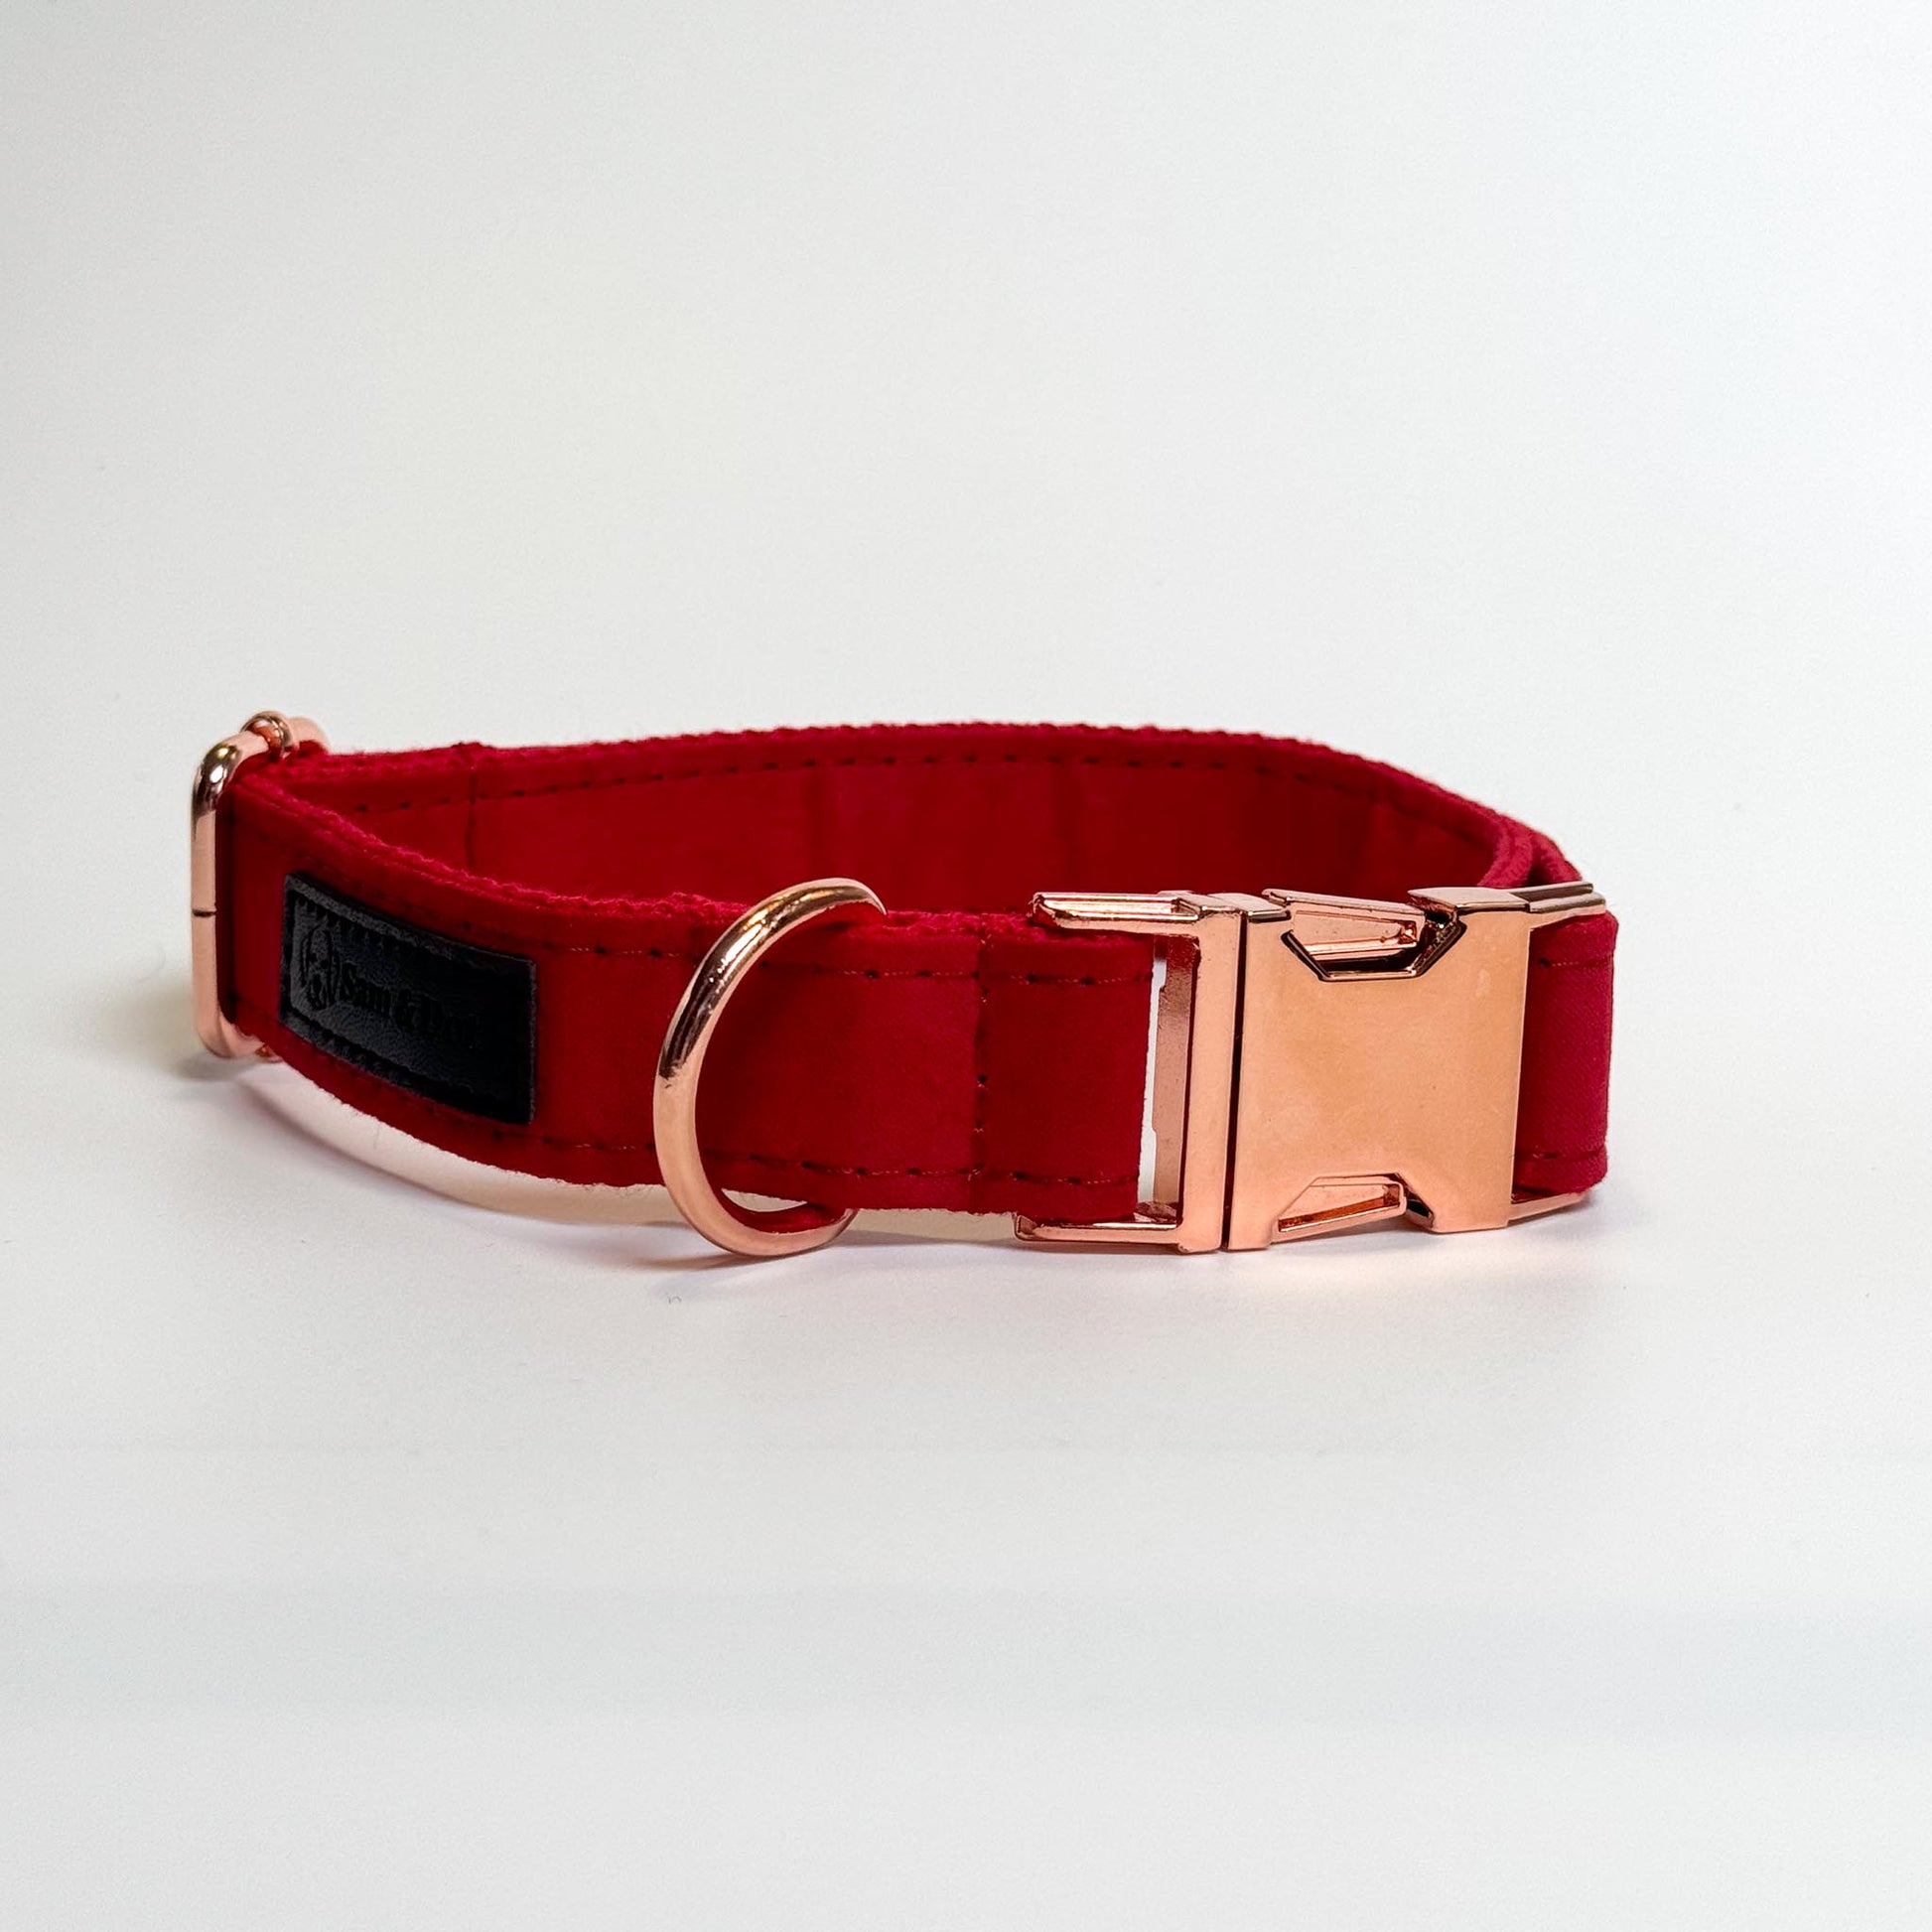 Fire Engine Red Engraved Dog Collar - Sam and Dot